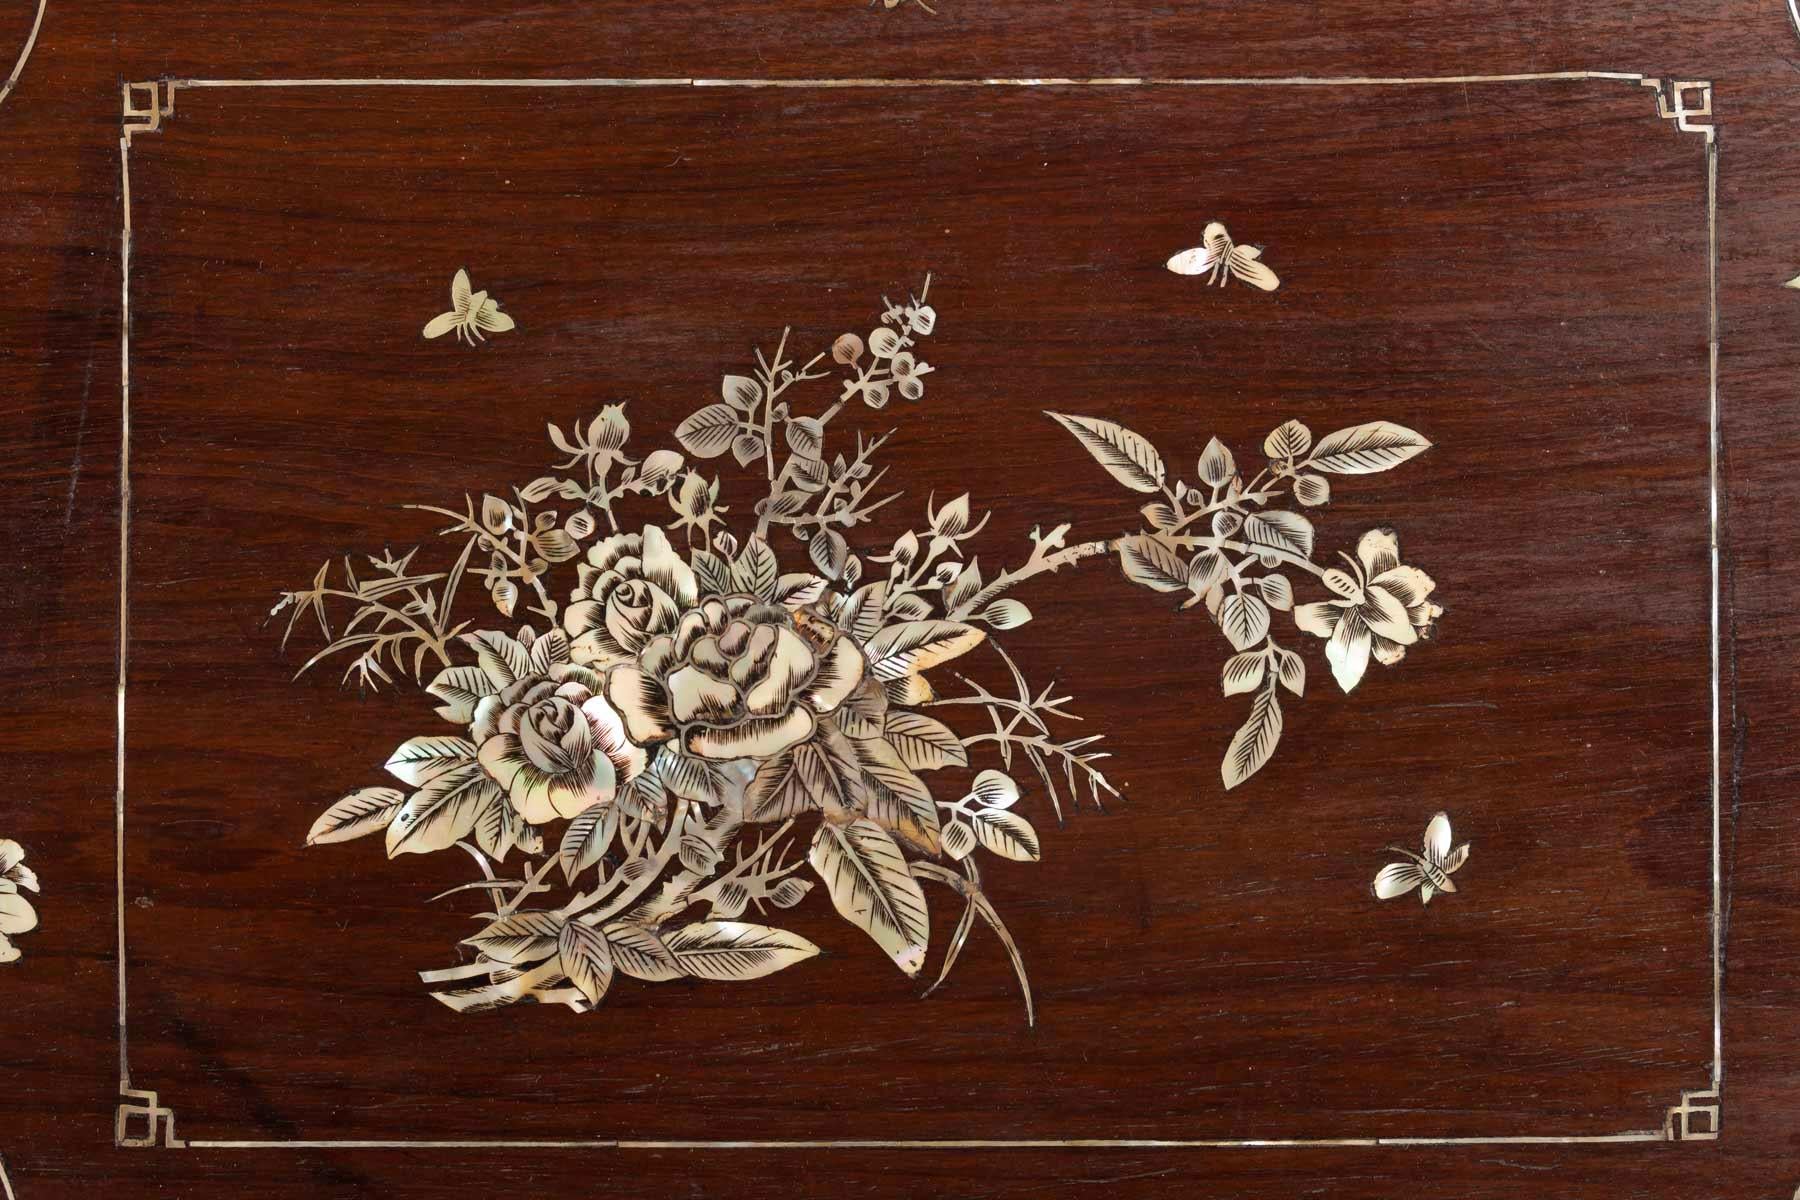 Asian Exotic Dark Wood Rectangular Tray Inlaid with Mother of Pearl Floral Designs